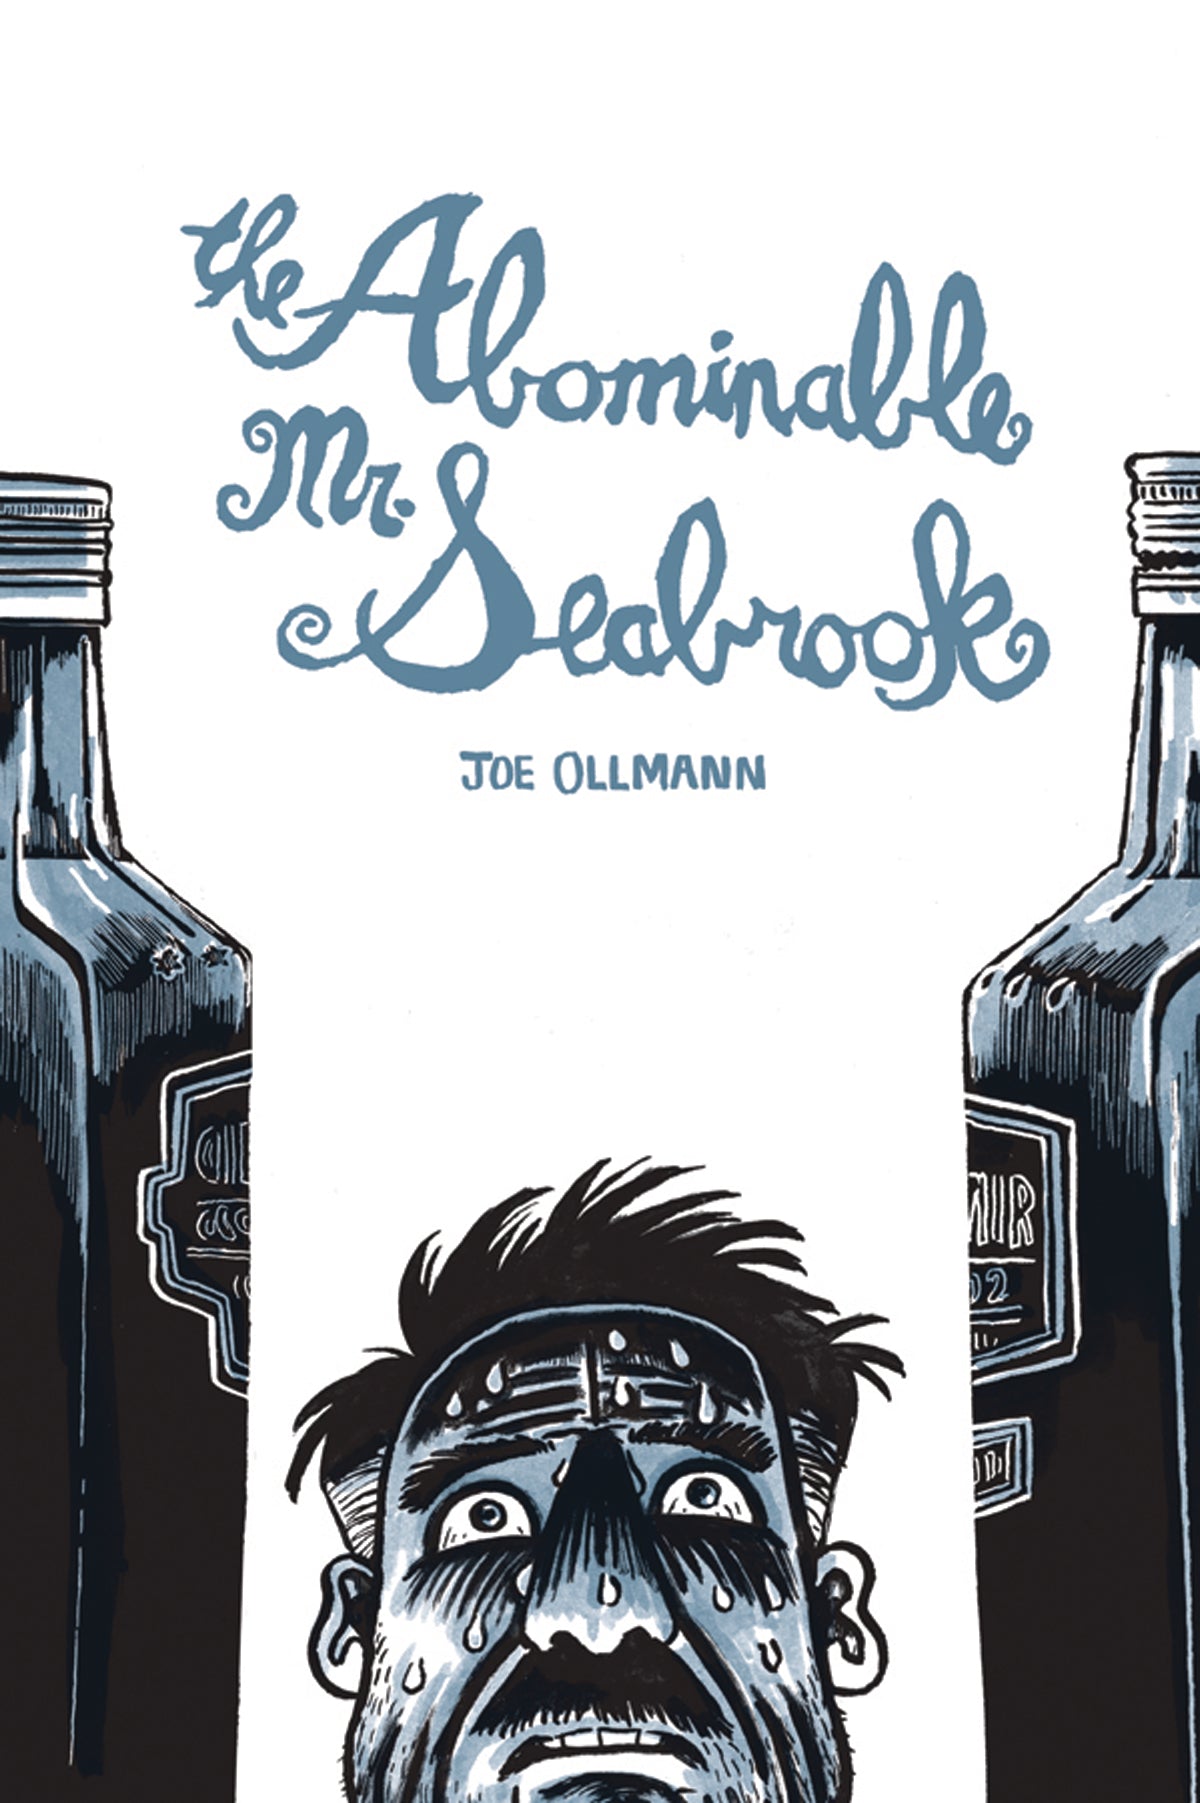 ABOMINABLE MR SEABROOK | L.A. Mood Comics and Games